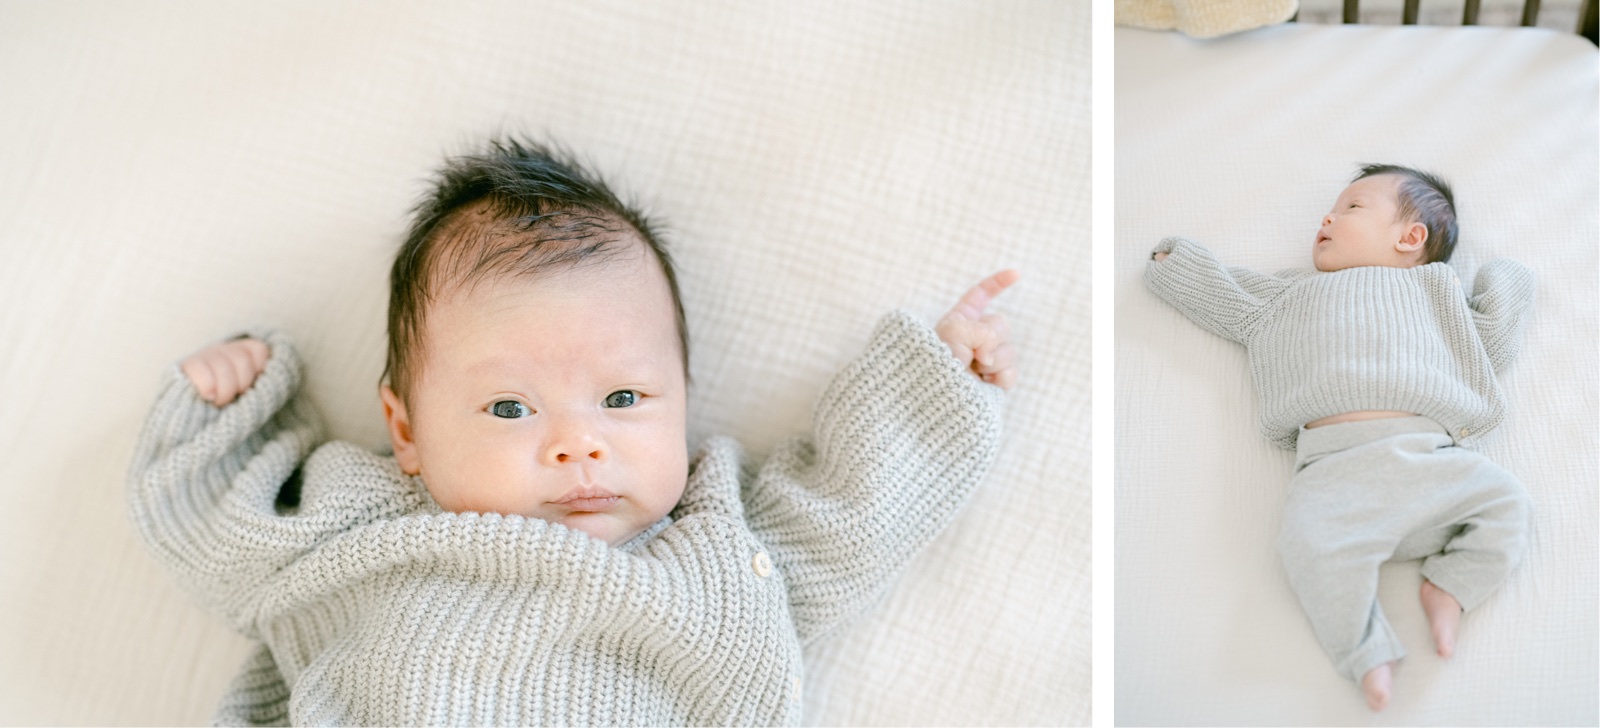 Candid photos of a Denver newborn baby inside her crib during a photoshoot